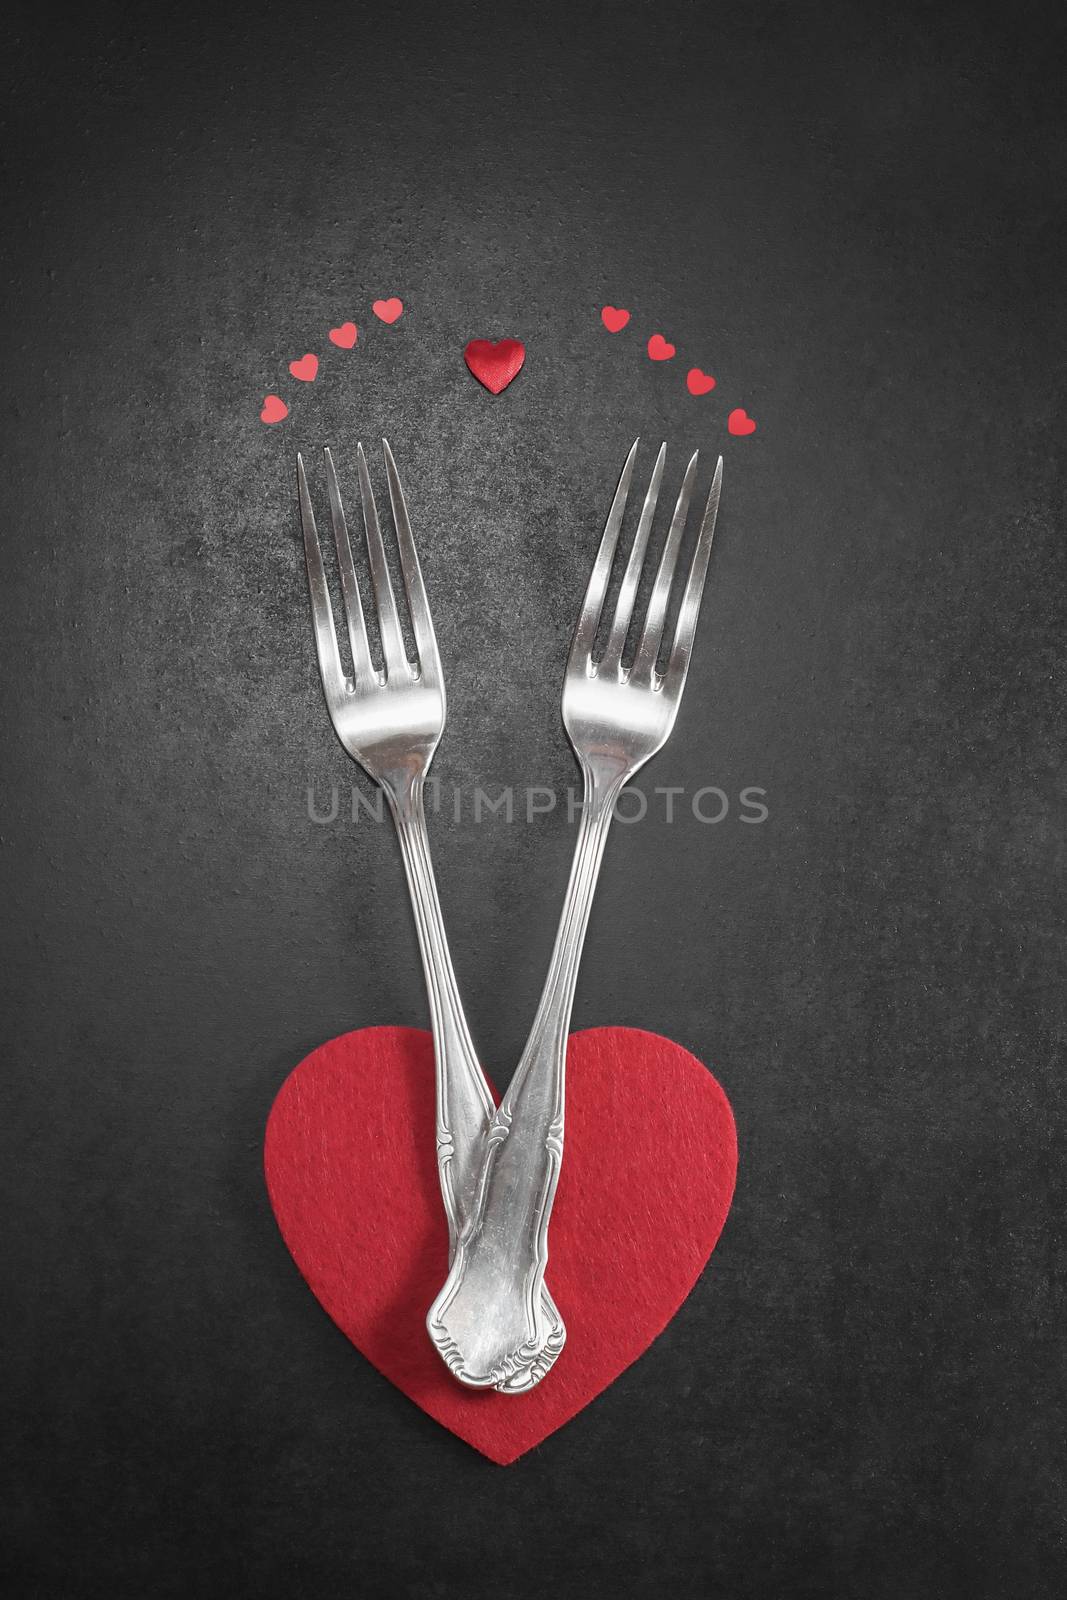 Valentines dinner table setting in rustic style with cutlery Romantic dinner concept. Done with a vintage retro filter